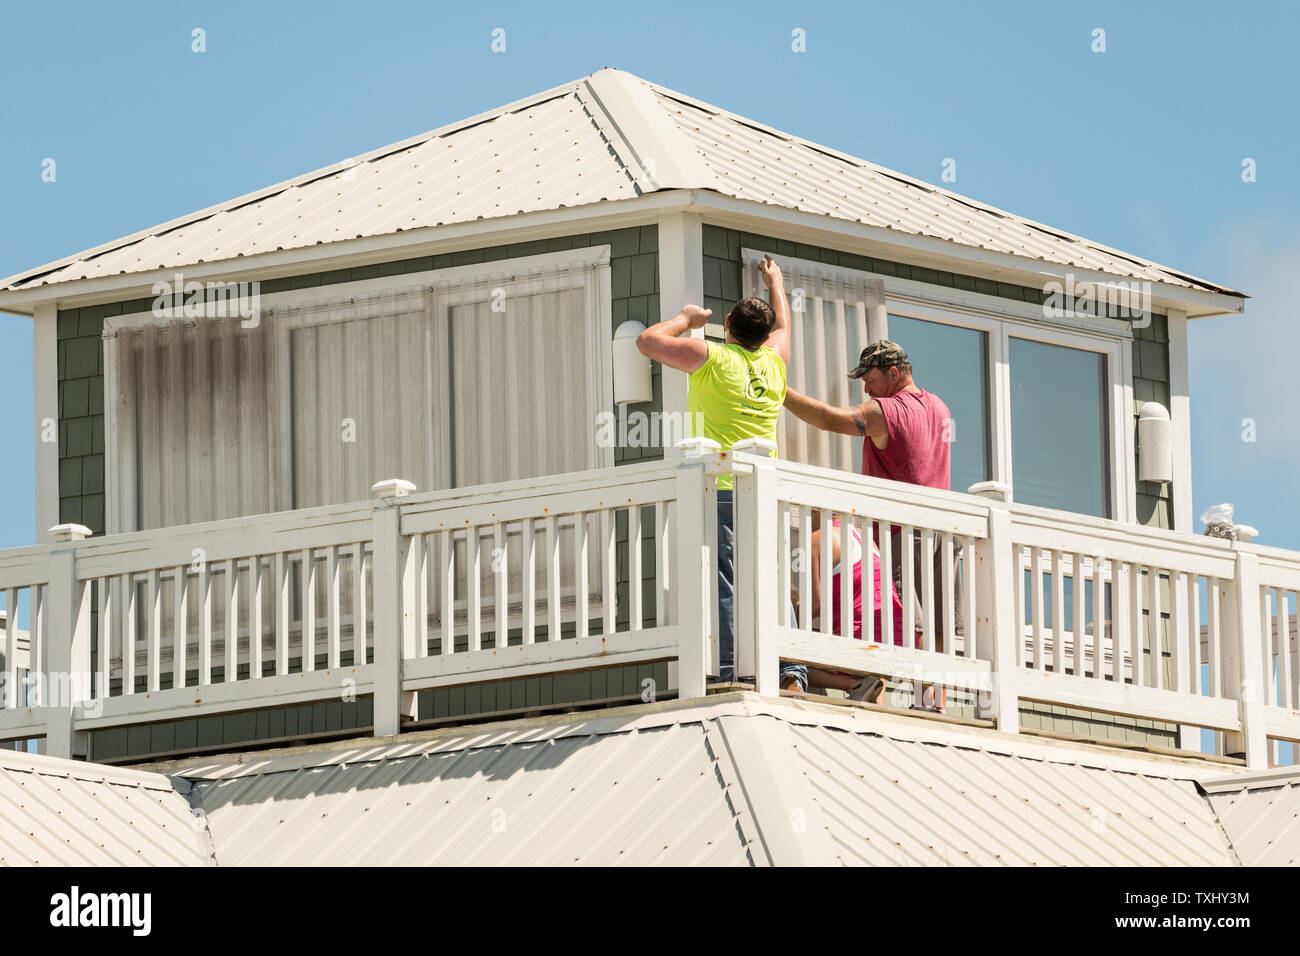 Workers attach hurricane shutters to windows along the beach in preparation for approaching Hurricane Florence September 11, 2018 in Isle of Palms, South Carolina. Florence, a category 4 storm, is expected to hit the coast between South and North Carolina and could be the strongest storm on record for the East Coast of the United States. Photo by Richard Ellis/UPI Stock Photo